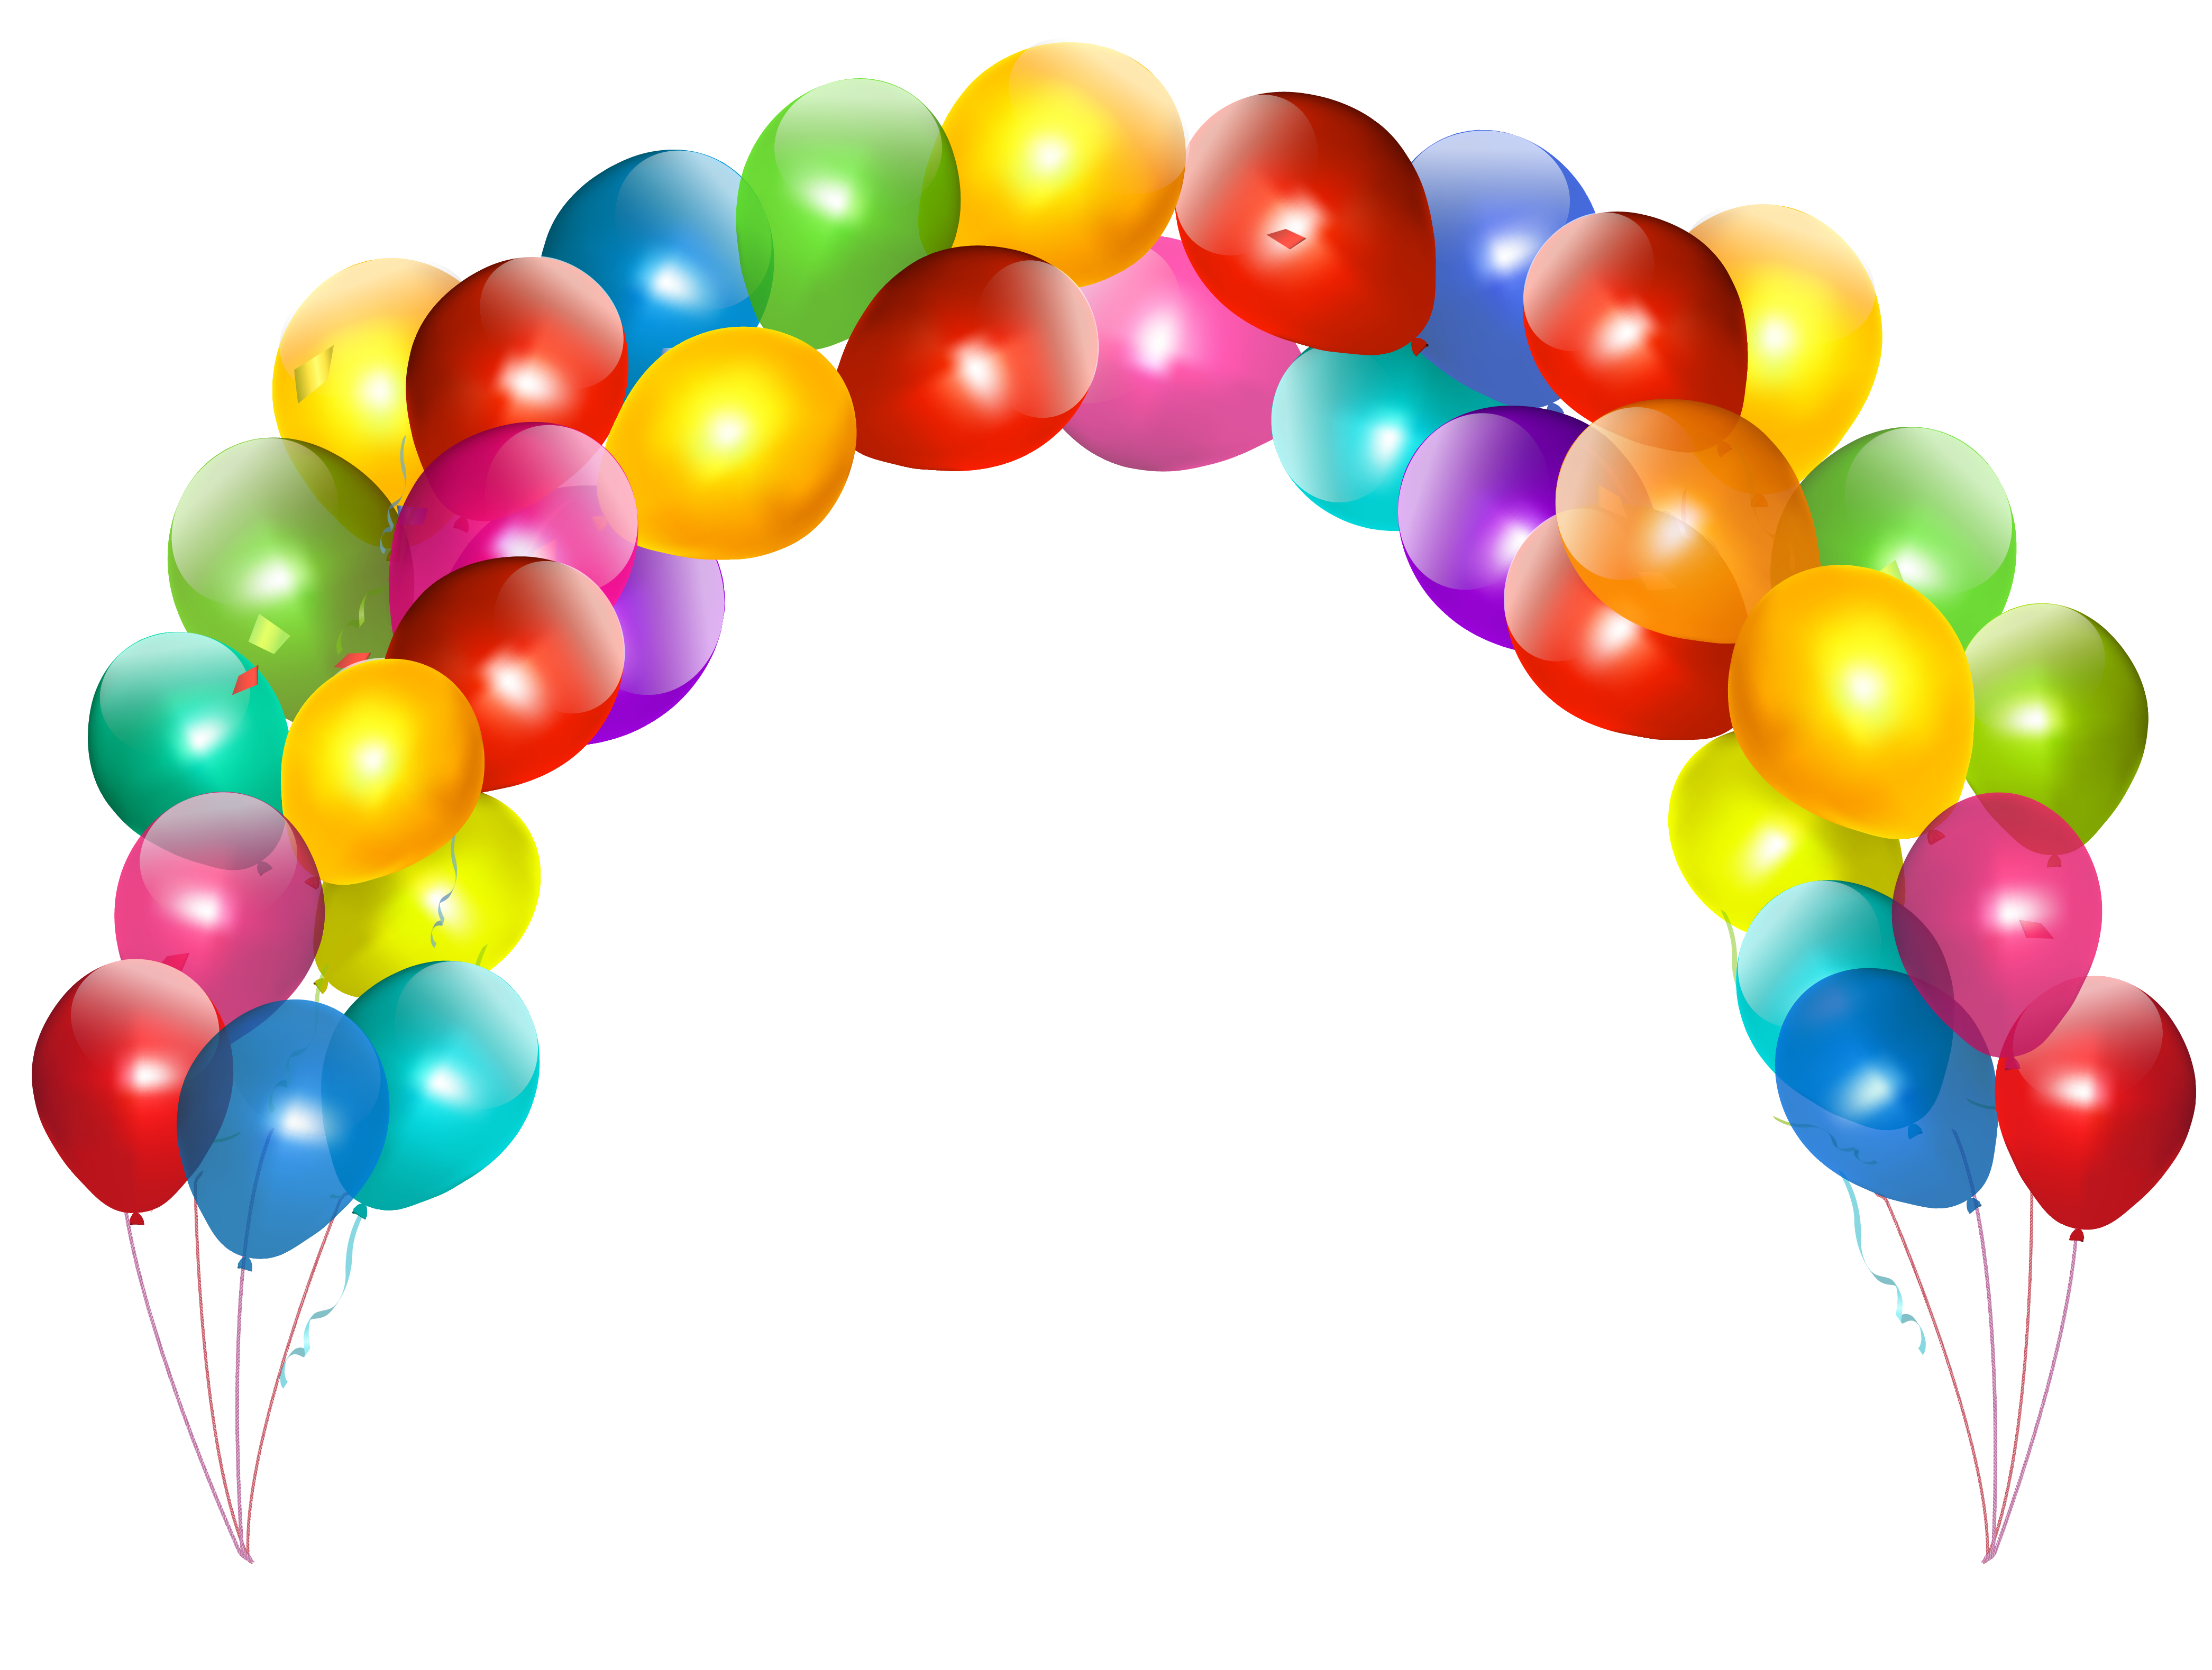 balloons images